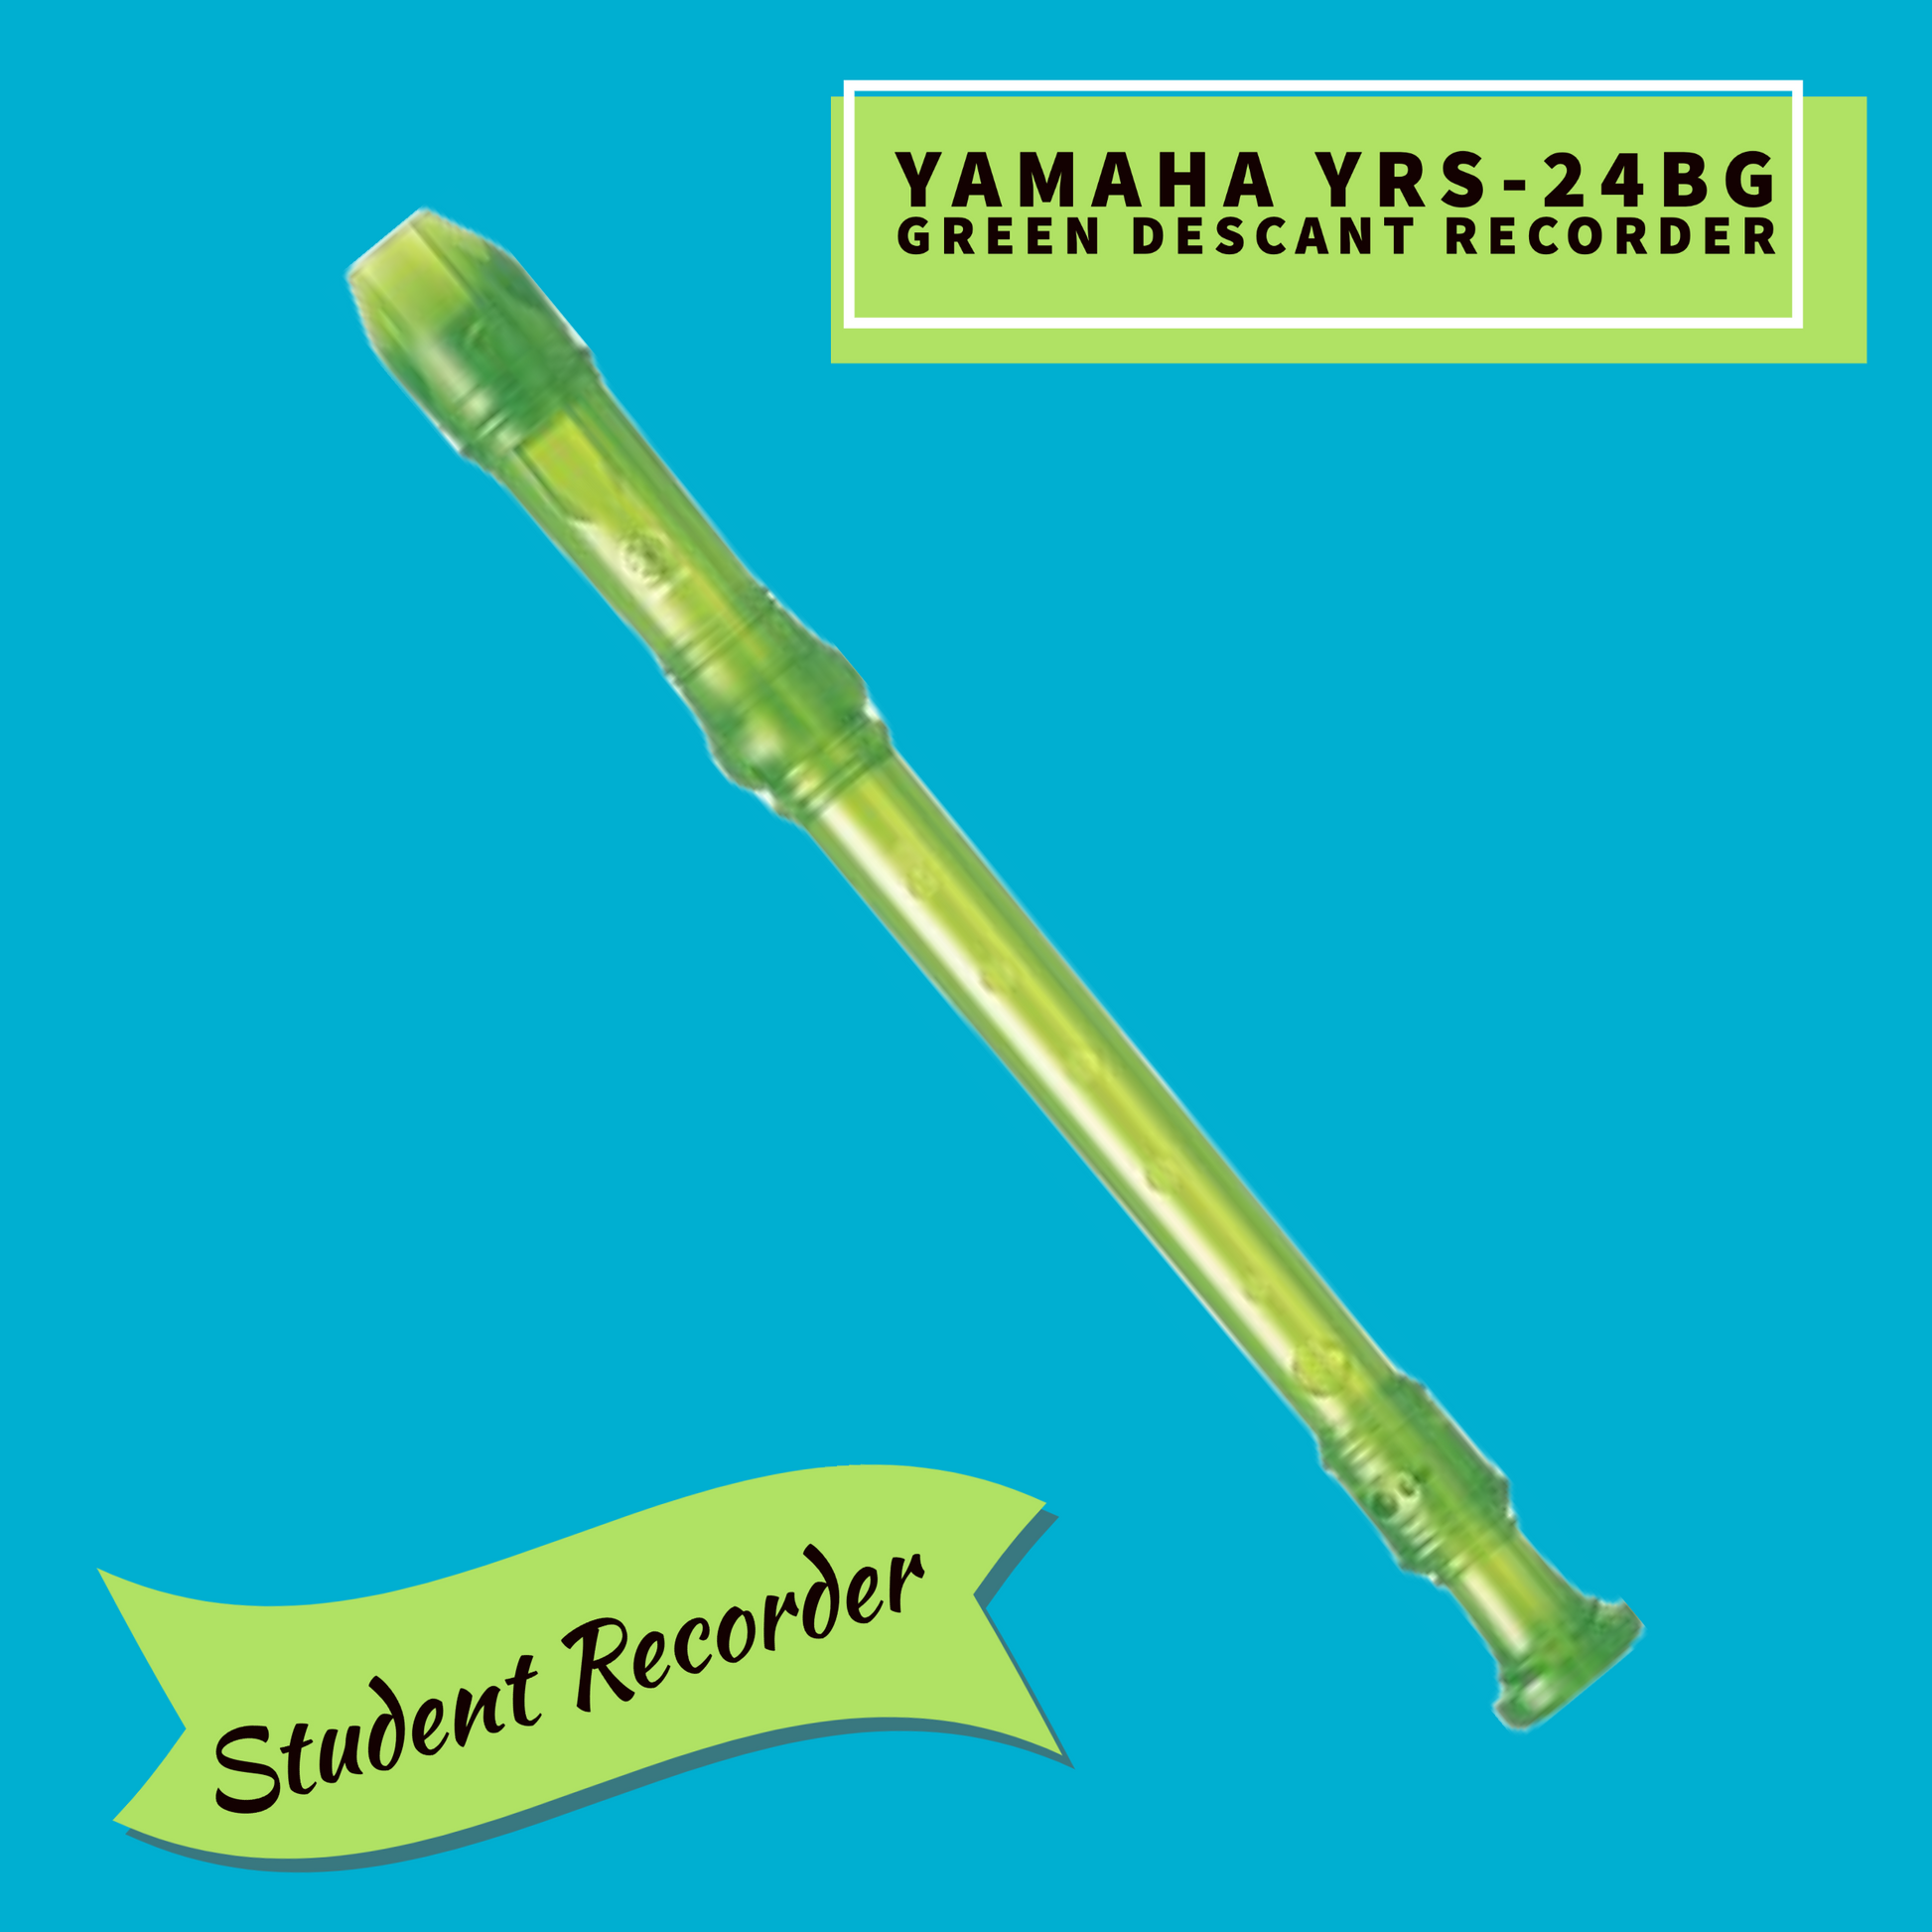 Yamaha Yrs-24Bg Descant C 3 Piece Student Recorder (Candy Green) Musical Instruments & Accessories